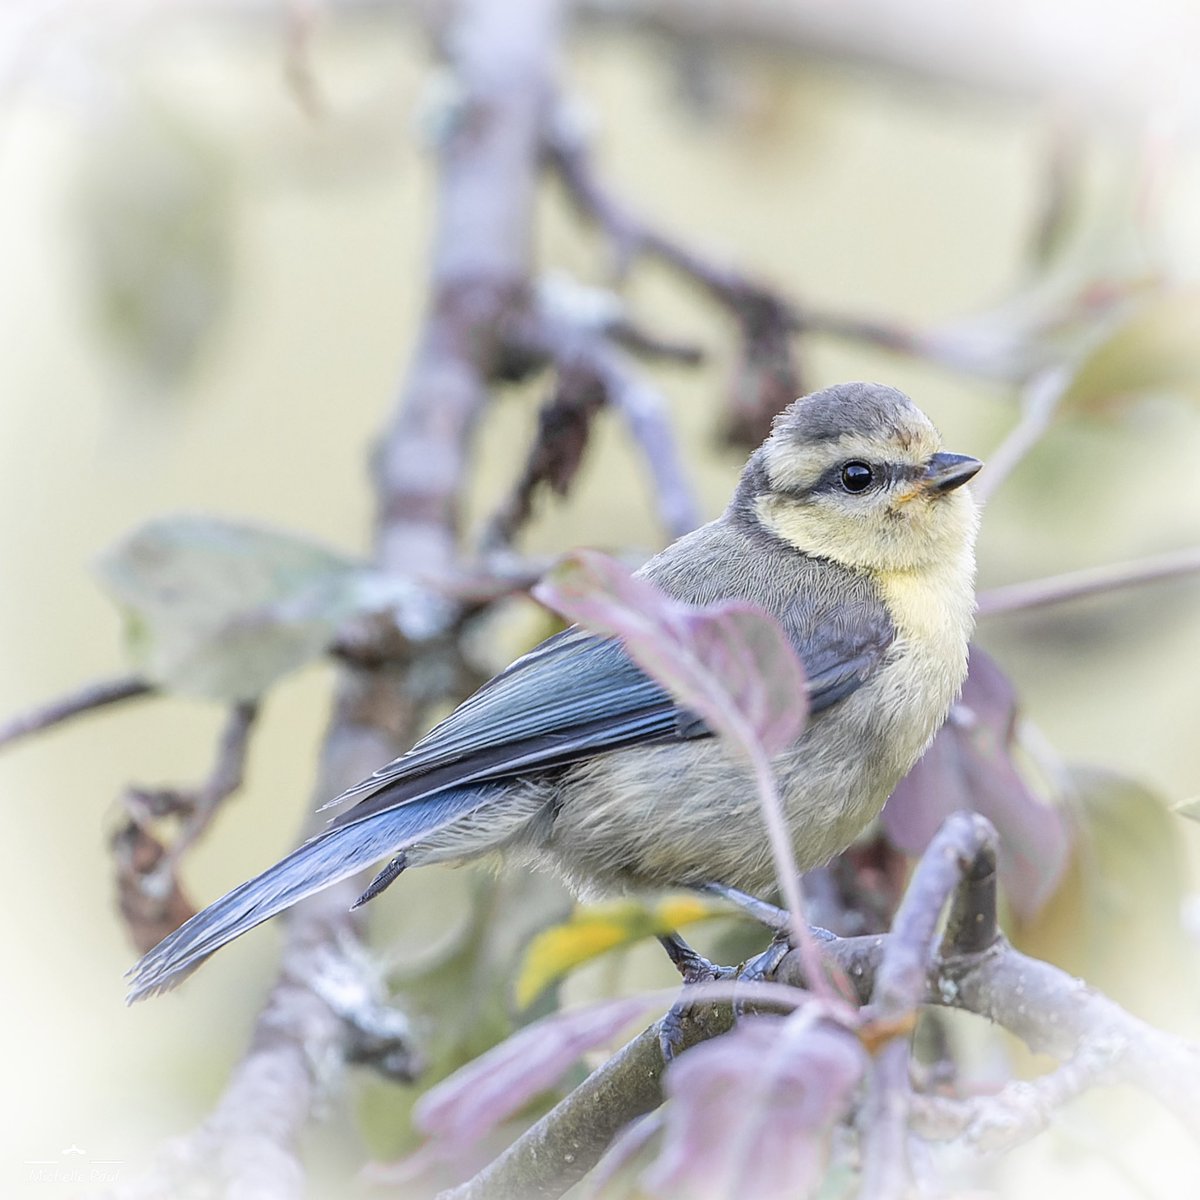 I have fallen in love with the local Blue Tit family of five. The babies are just 😍💙

#BirdsOfTwitter #birdphotography #birds #TwitterNatureCommunity #TwitterNaturePhotography #nikonphotography #birdwatching @thephotohour #babybirds #love #socute